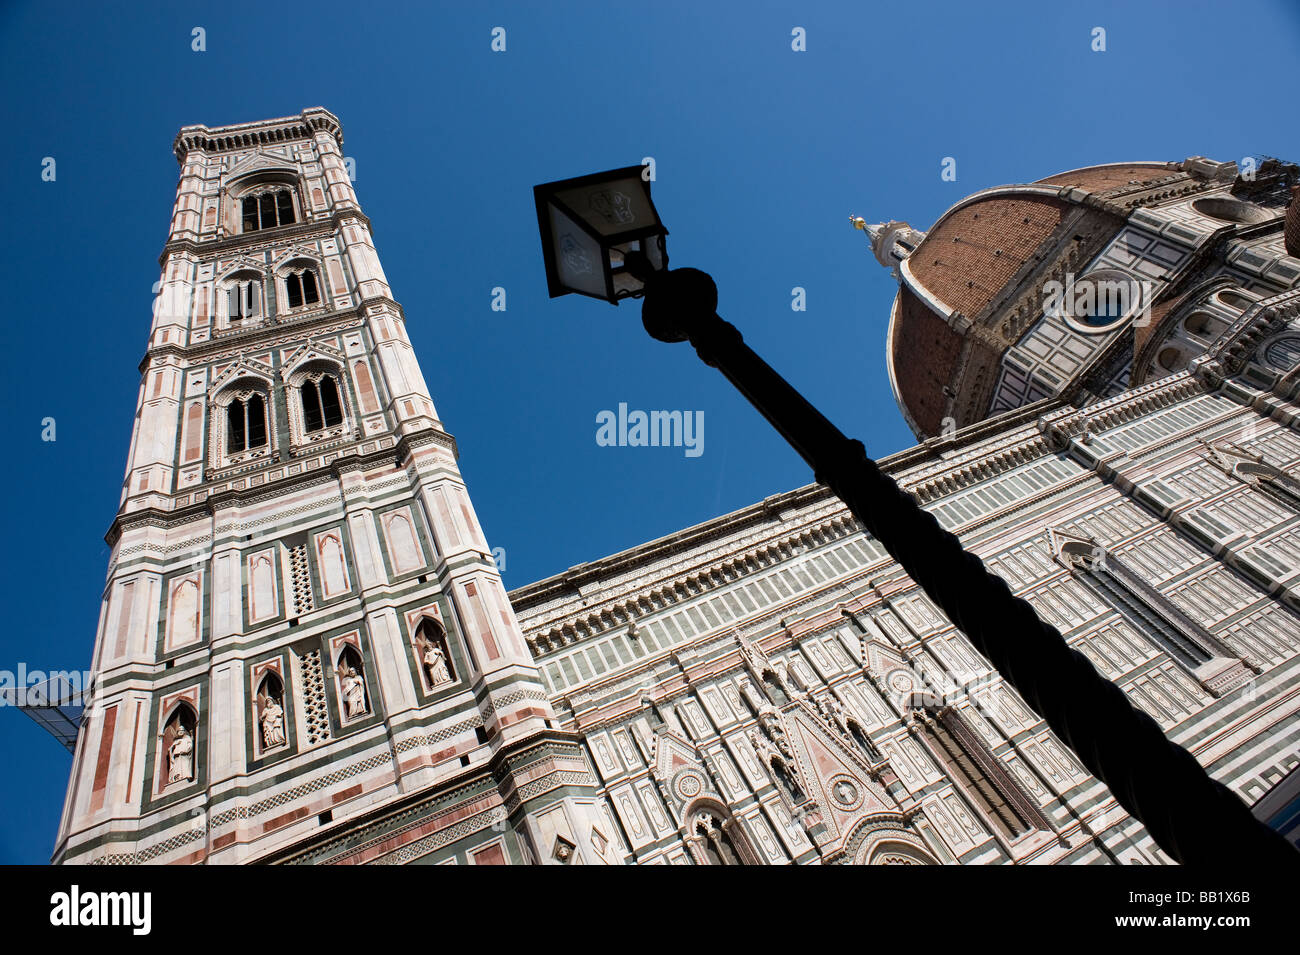 Duomo Giotto Bell Tower Campanile Brunelleschi cupola Florence Firenze Italy Tuscany Toscana Renaissance Art Culture upright Ca Stock Photo